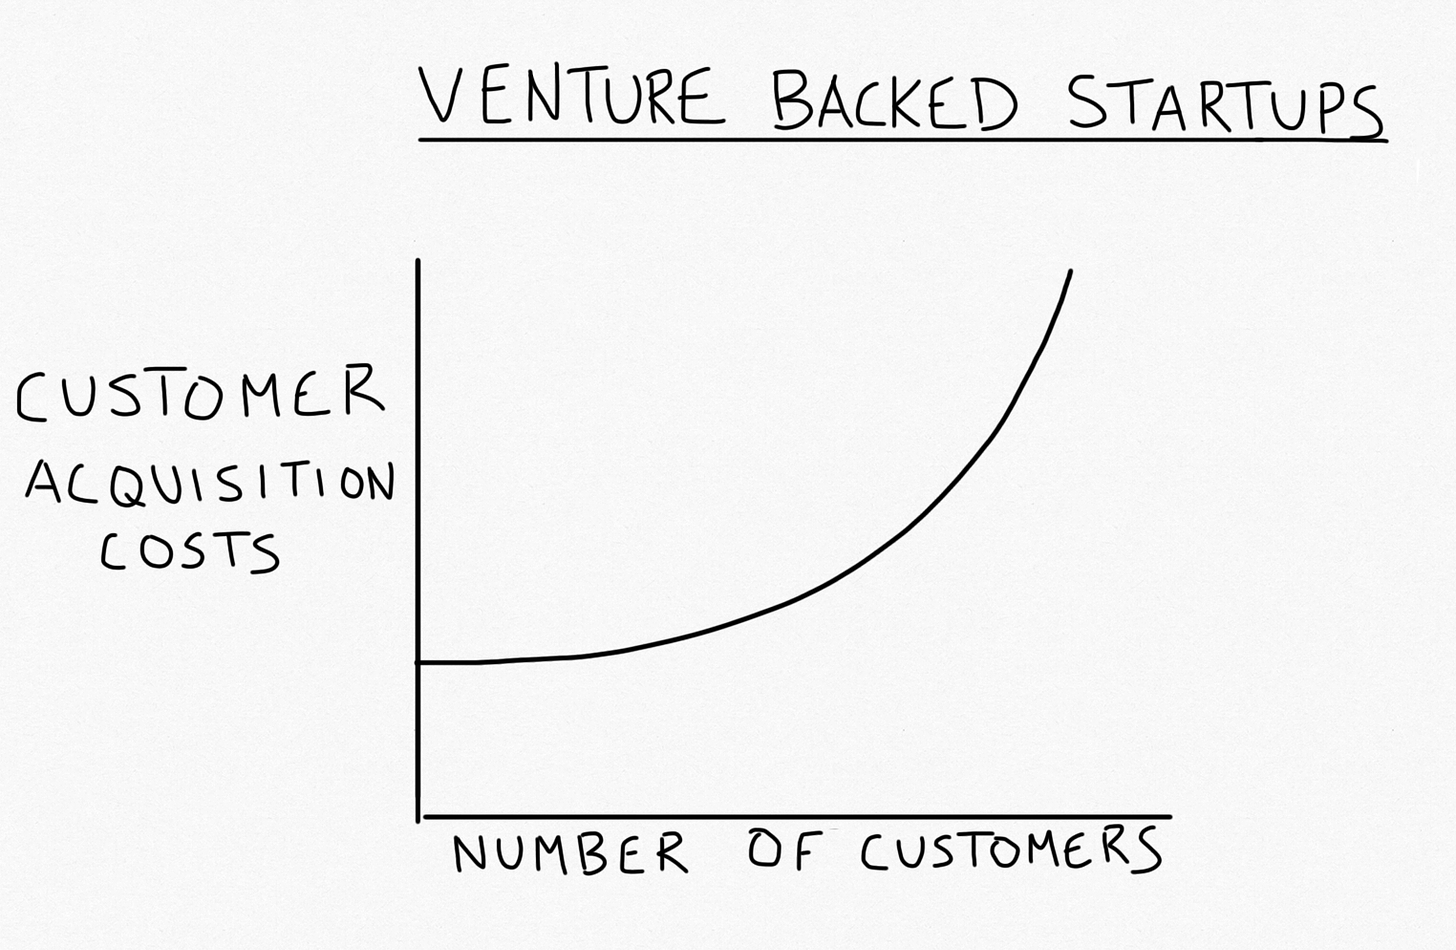 Customer acquisition costs are increasing exponentially.